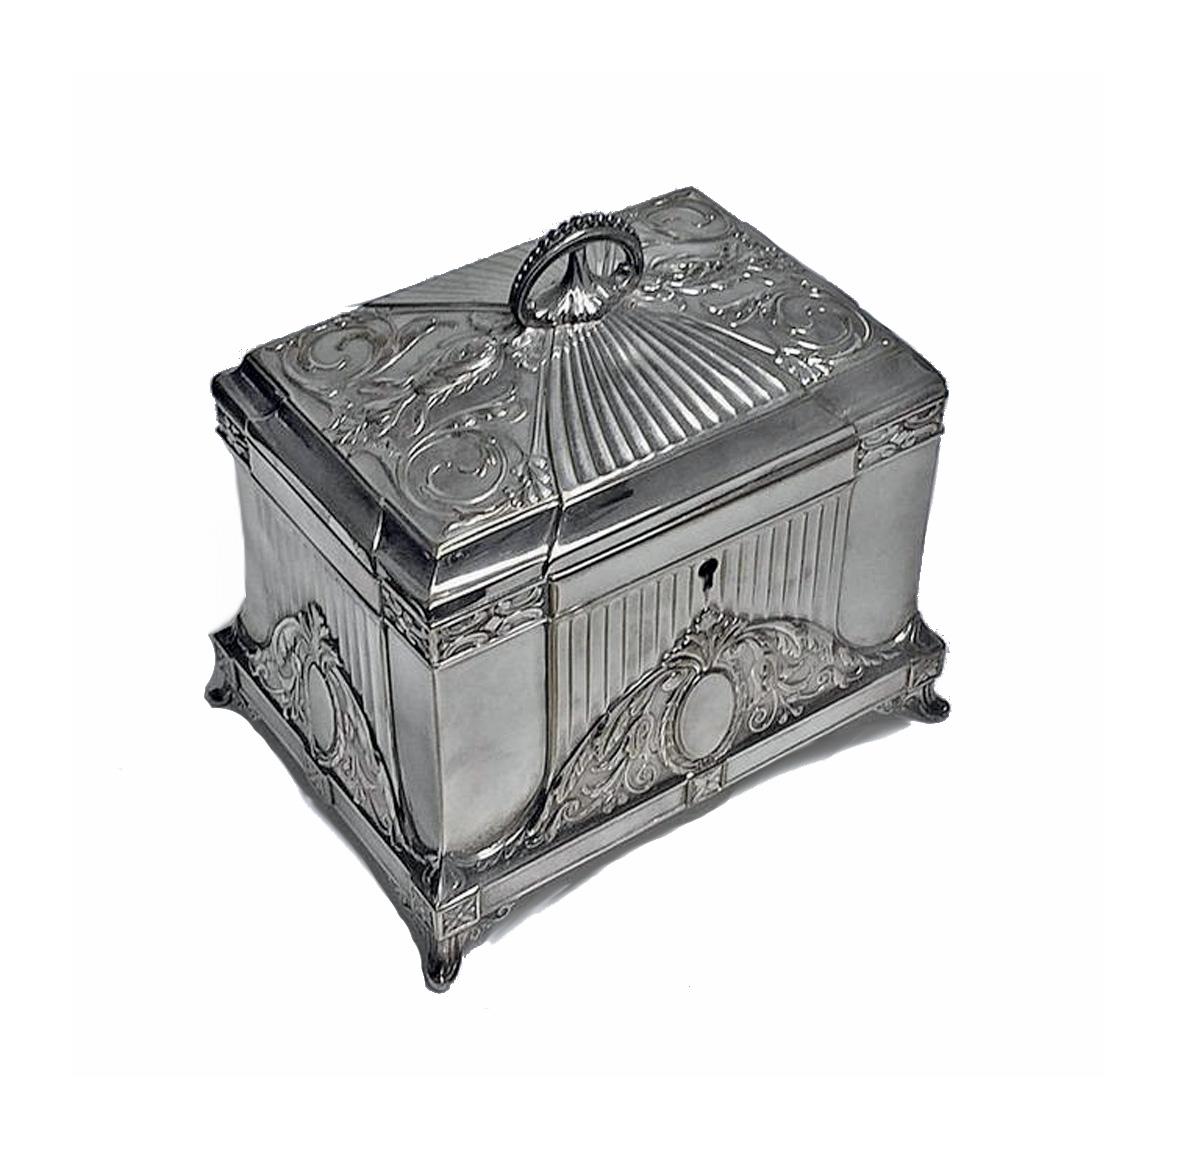 WMF Jugendstil Secessionist Silver plate Jewellery Box, Germany, C.1900. The box of rectangular shape on four turned stylised supports, conforming in style to cornices and decoration of sides and concave dome shape hinged cover with hemispherical